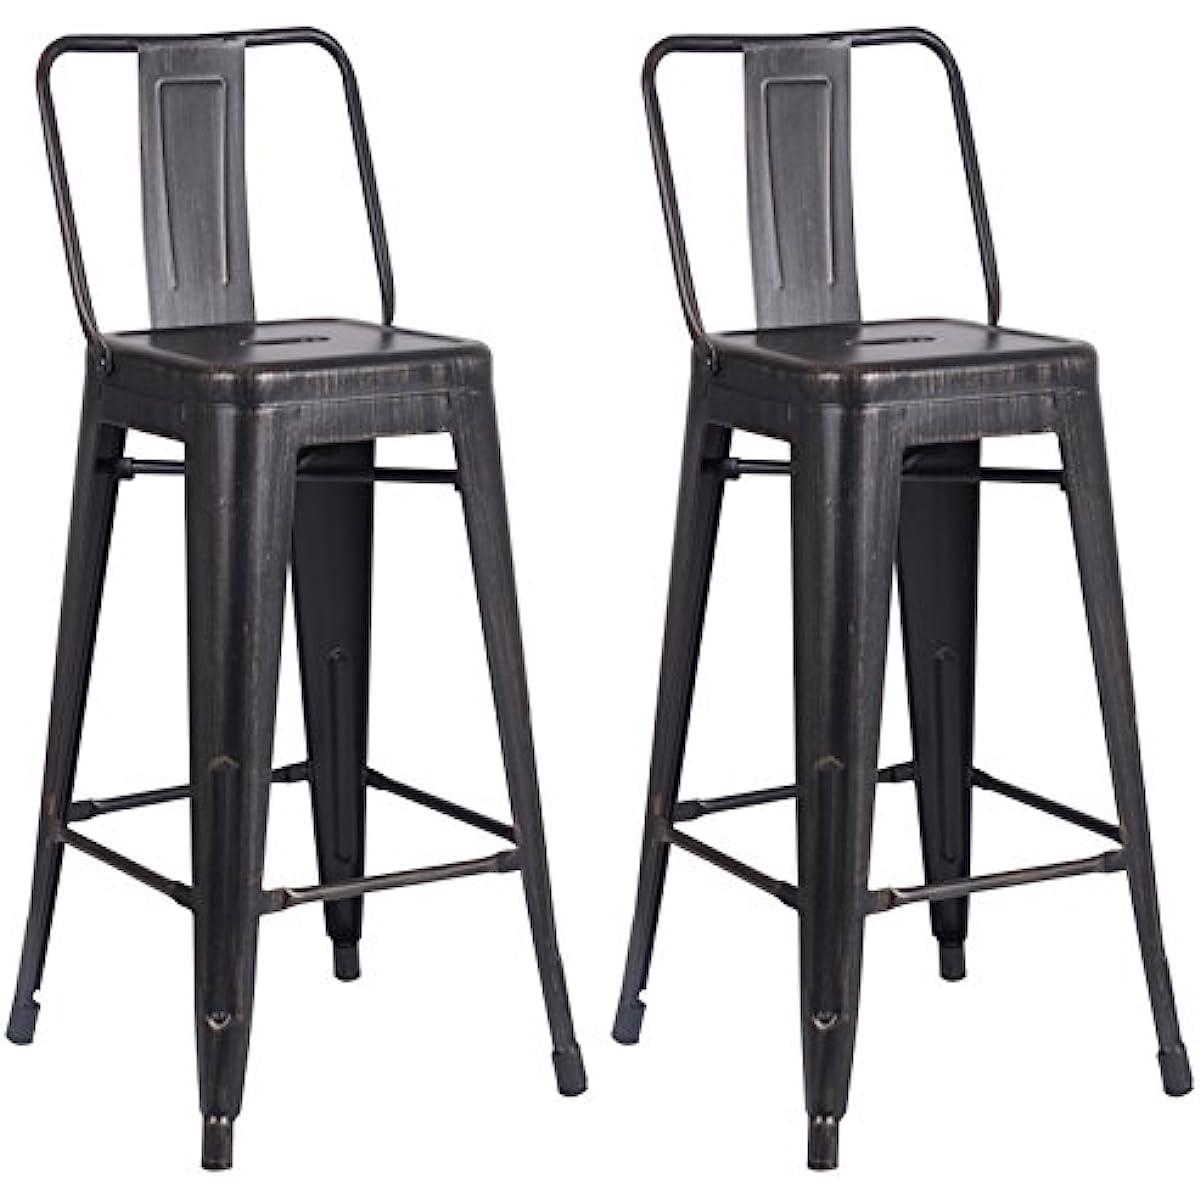 

AC Pacific Modern Industrial Metal Bar Stool Bucket Back and 4 Leg Design Ideal for Kitchen Island or Counter Top Set of 2 30 Seat Distressed Black